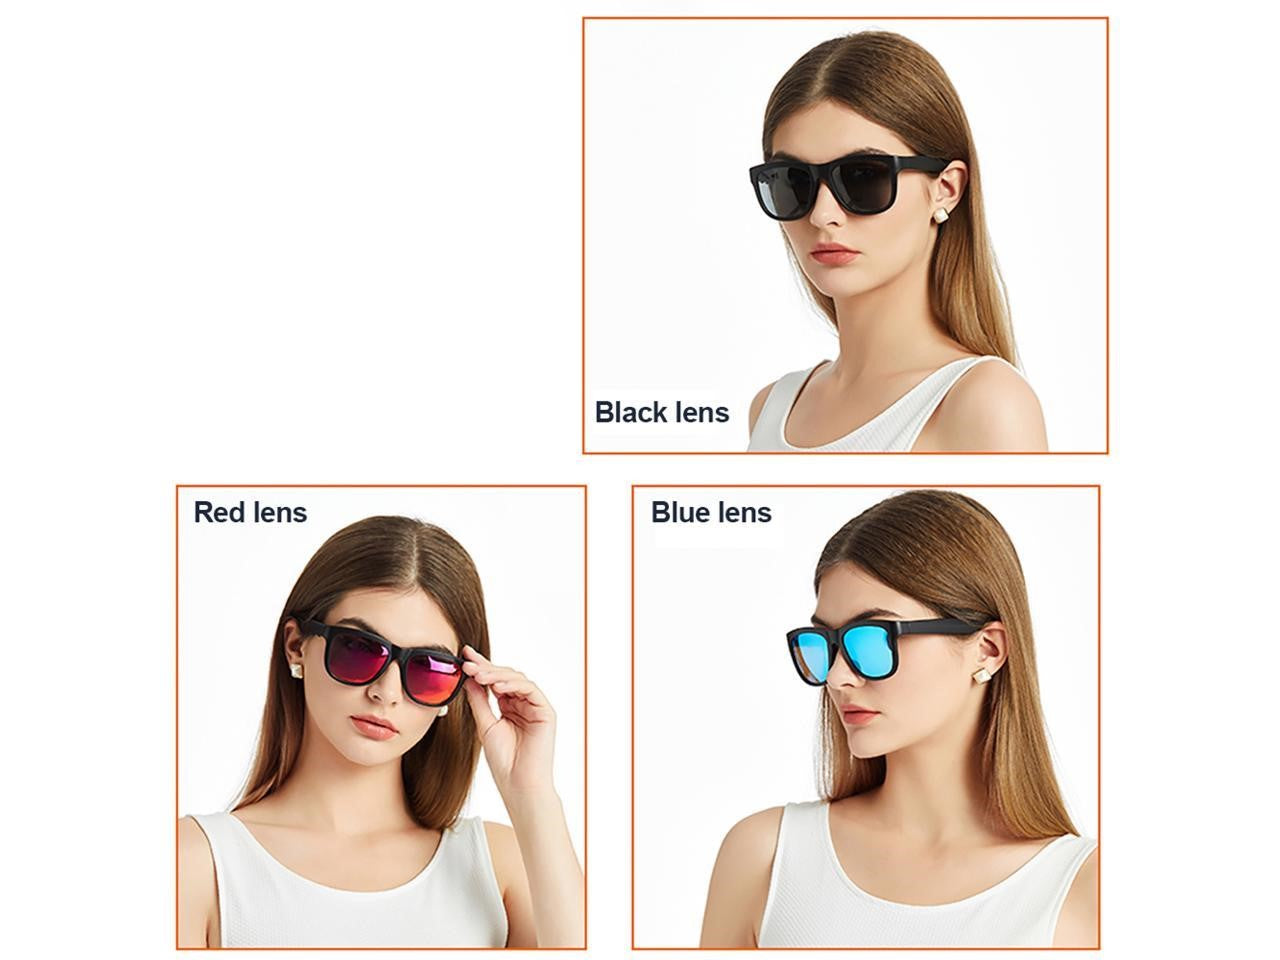 Smart Sunglasses with Polarised Lenses & Bluetooth Connectivity - FREE SHIPPING - RED COLOUR